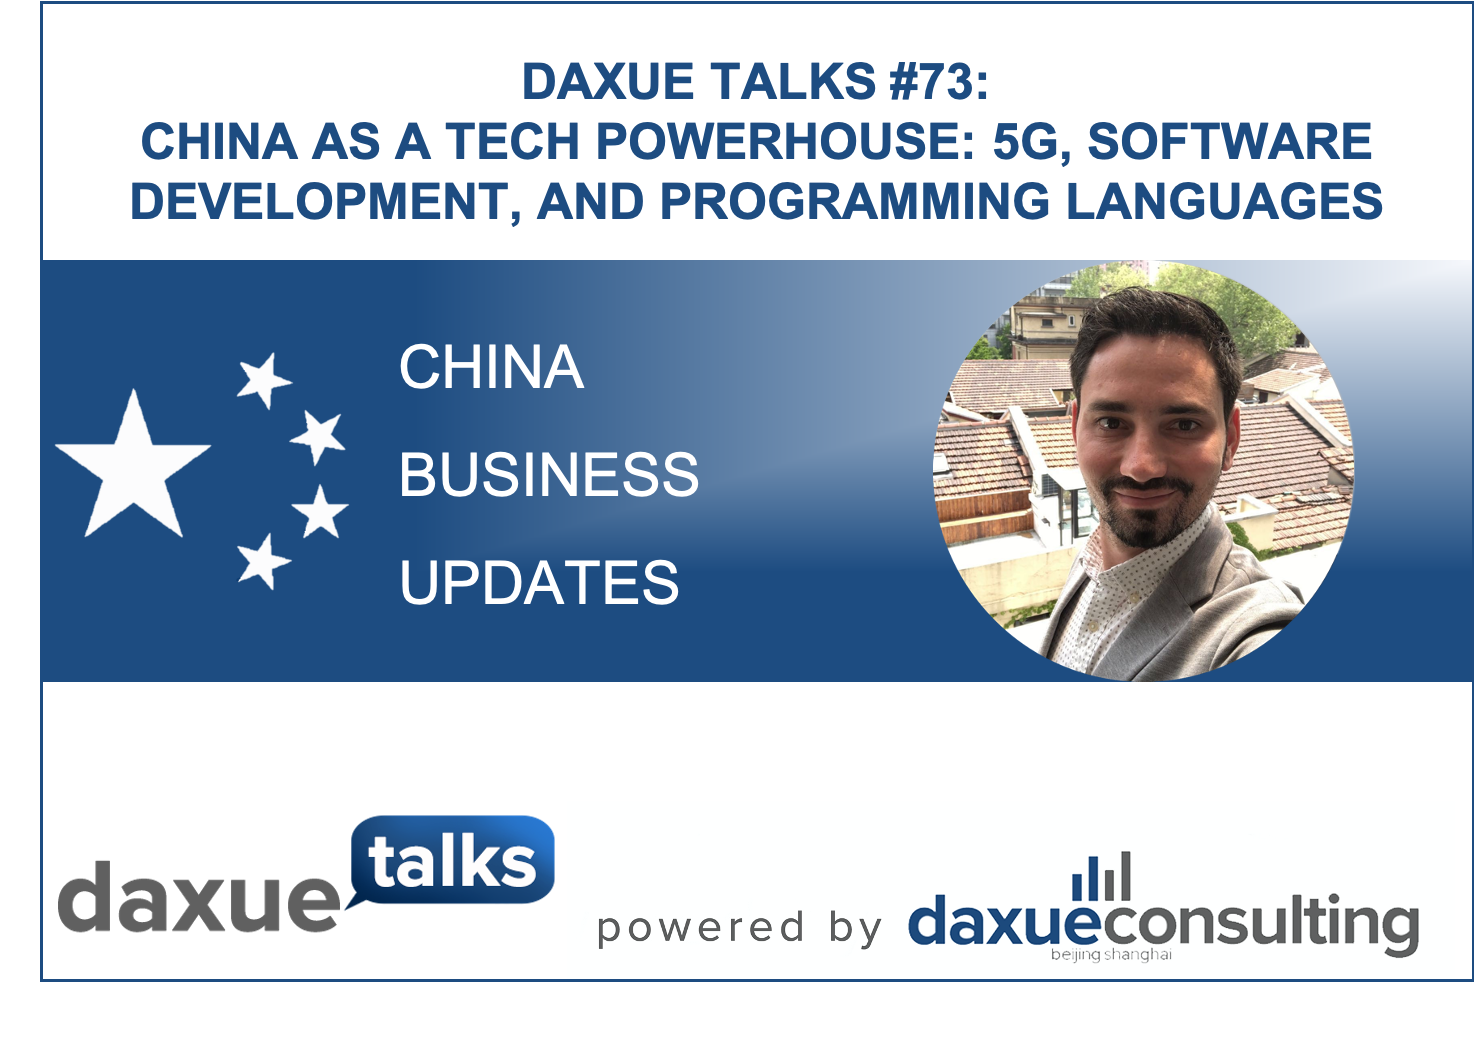 Daxue Talks 73: China as a tech powerhouse: 5G, software development, and programming languages